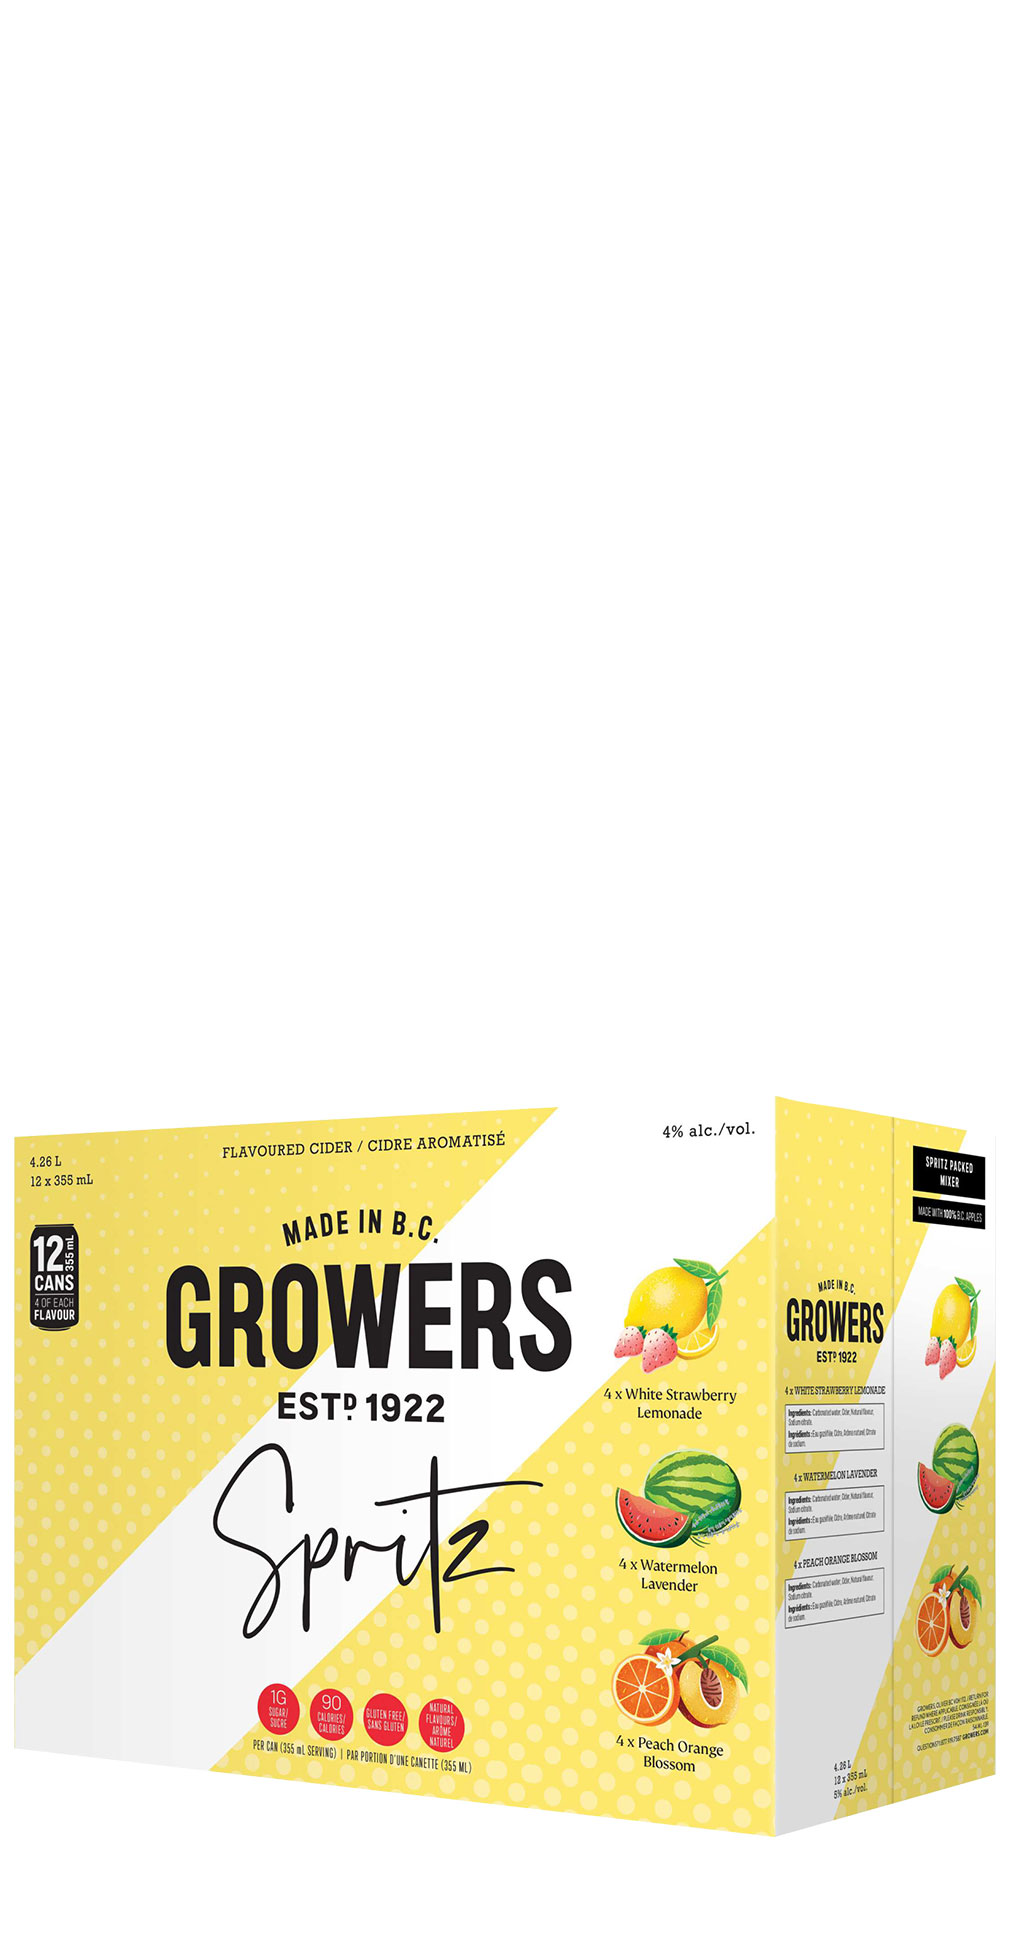 Box of Growers spritz pack of ciders